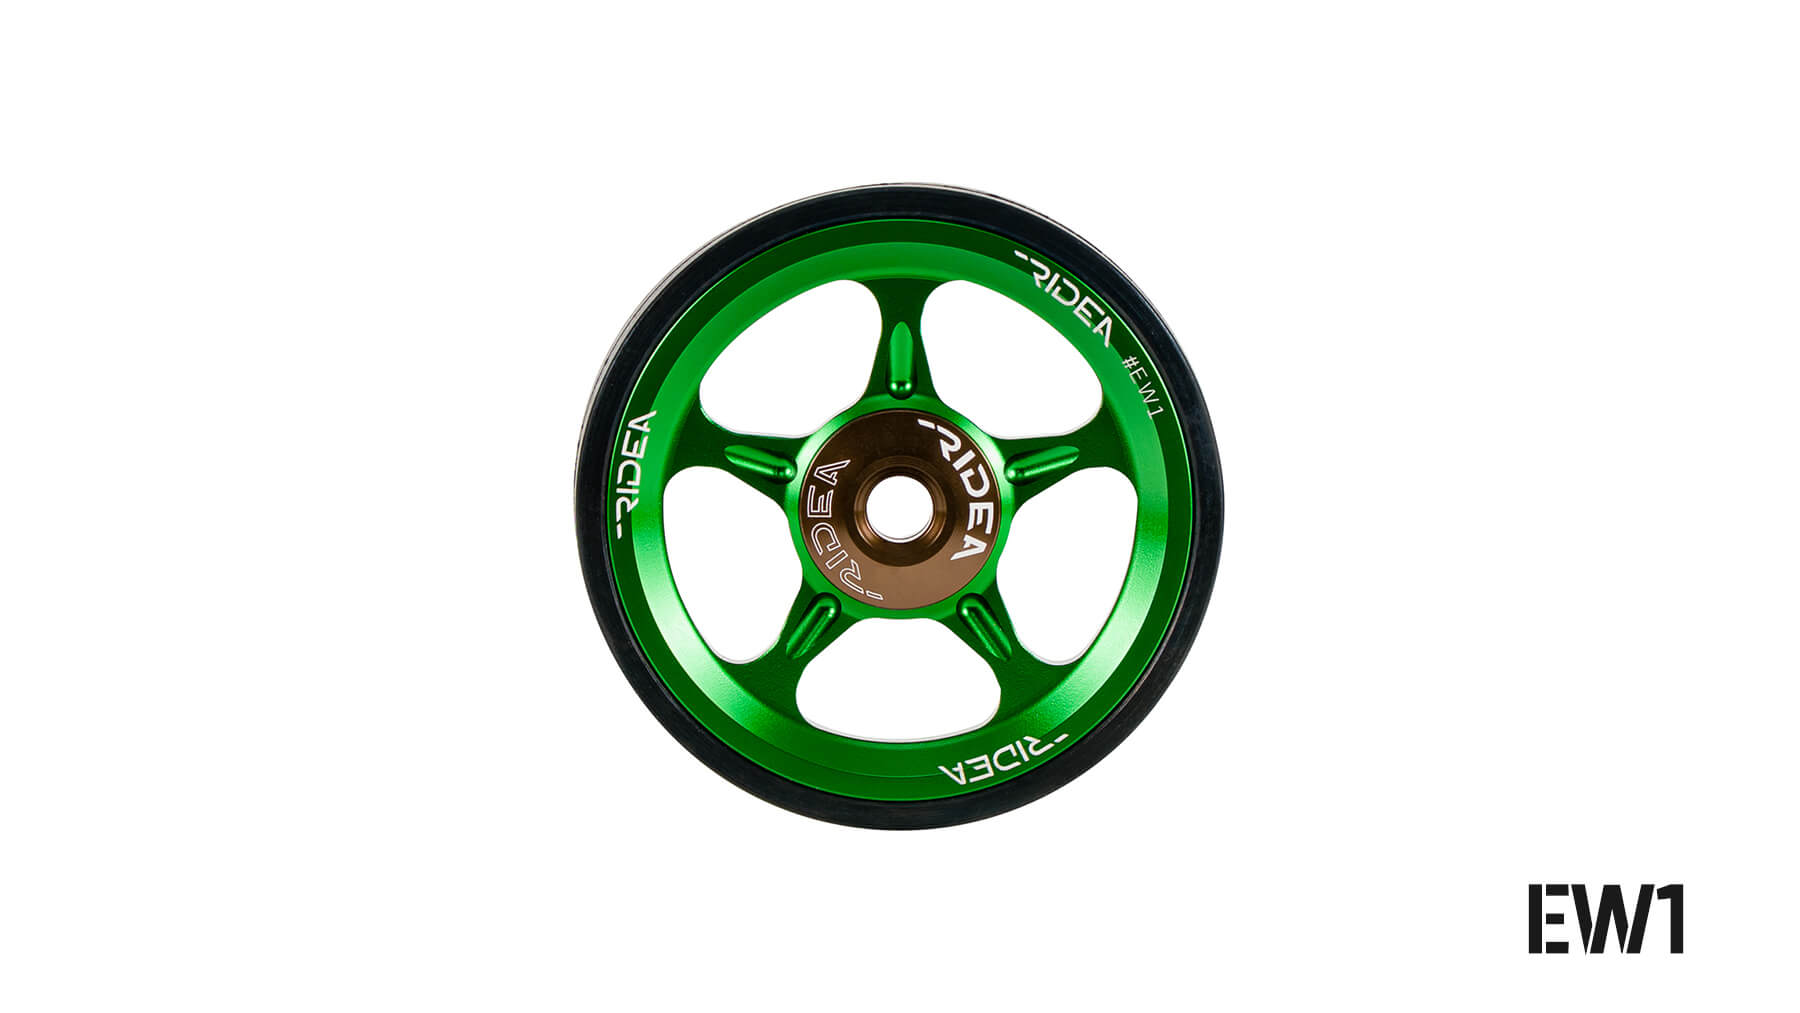 Eazy wheels for Brompton